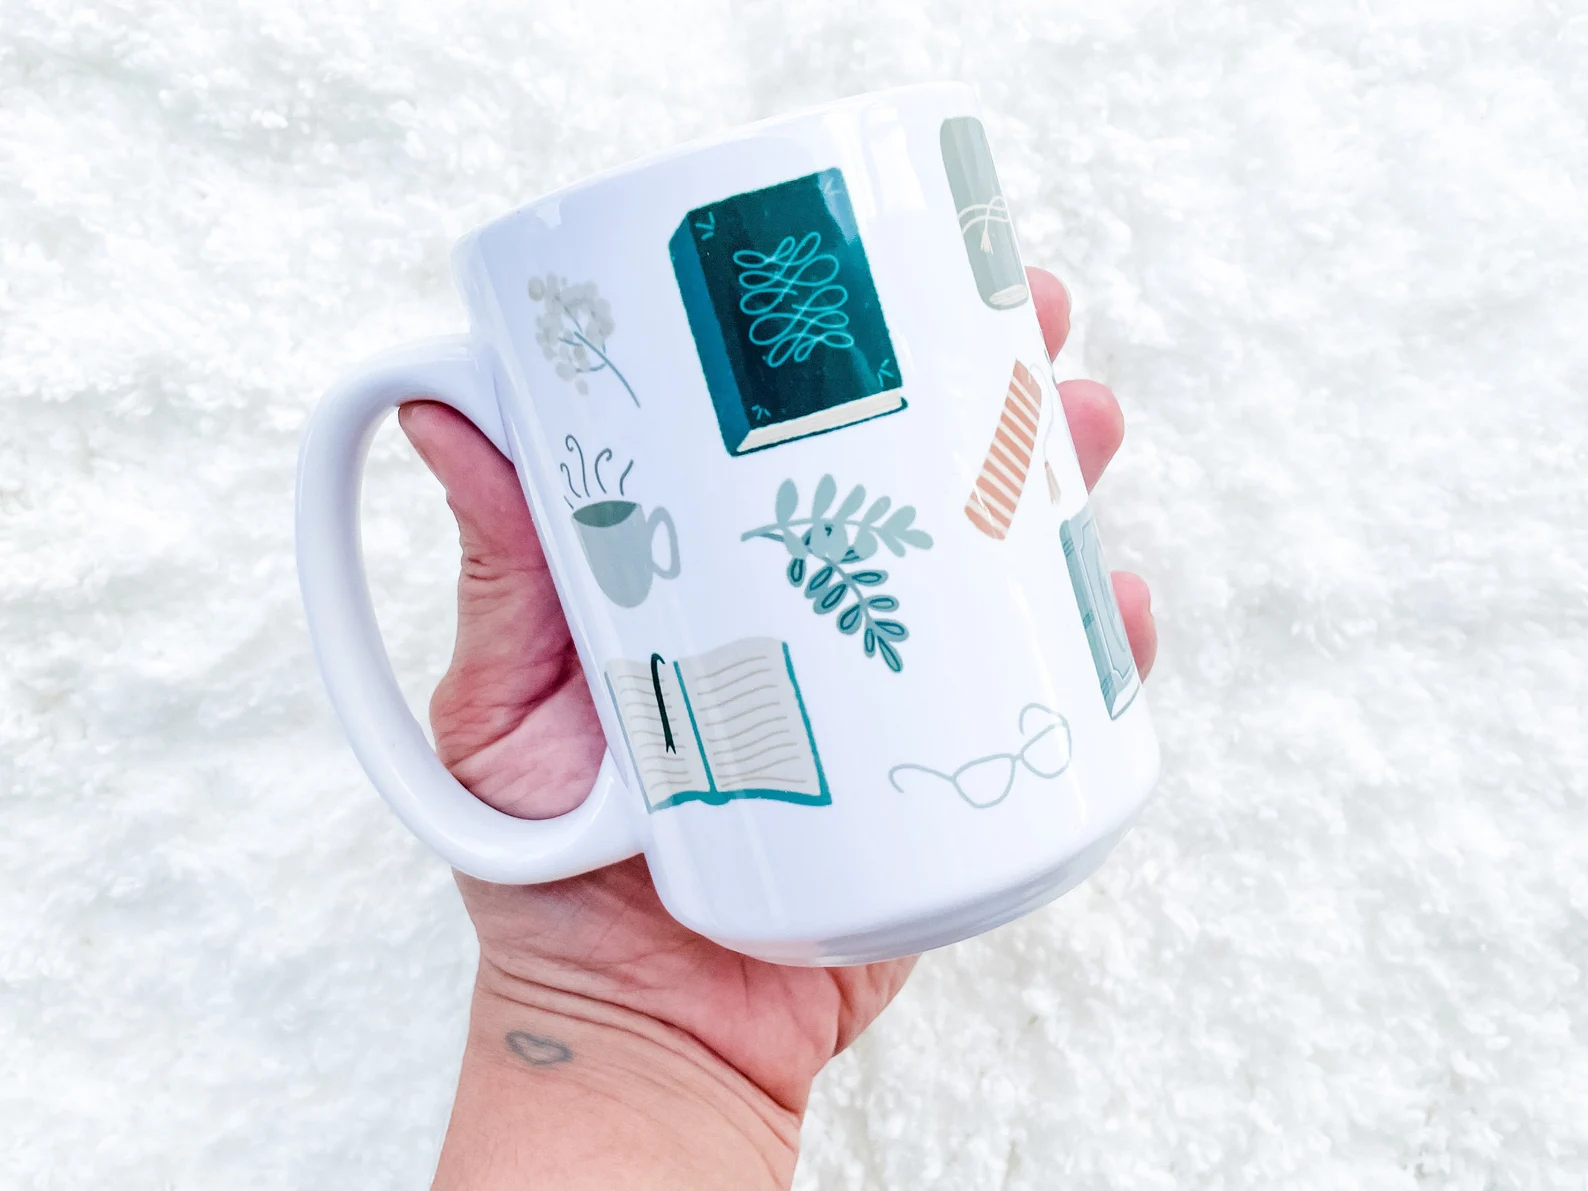 white mug with a vintage flatlay style of illustration that depicts books, glasses, mugs, and plants